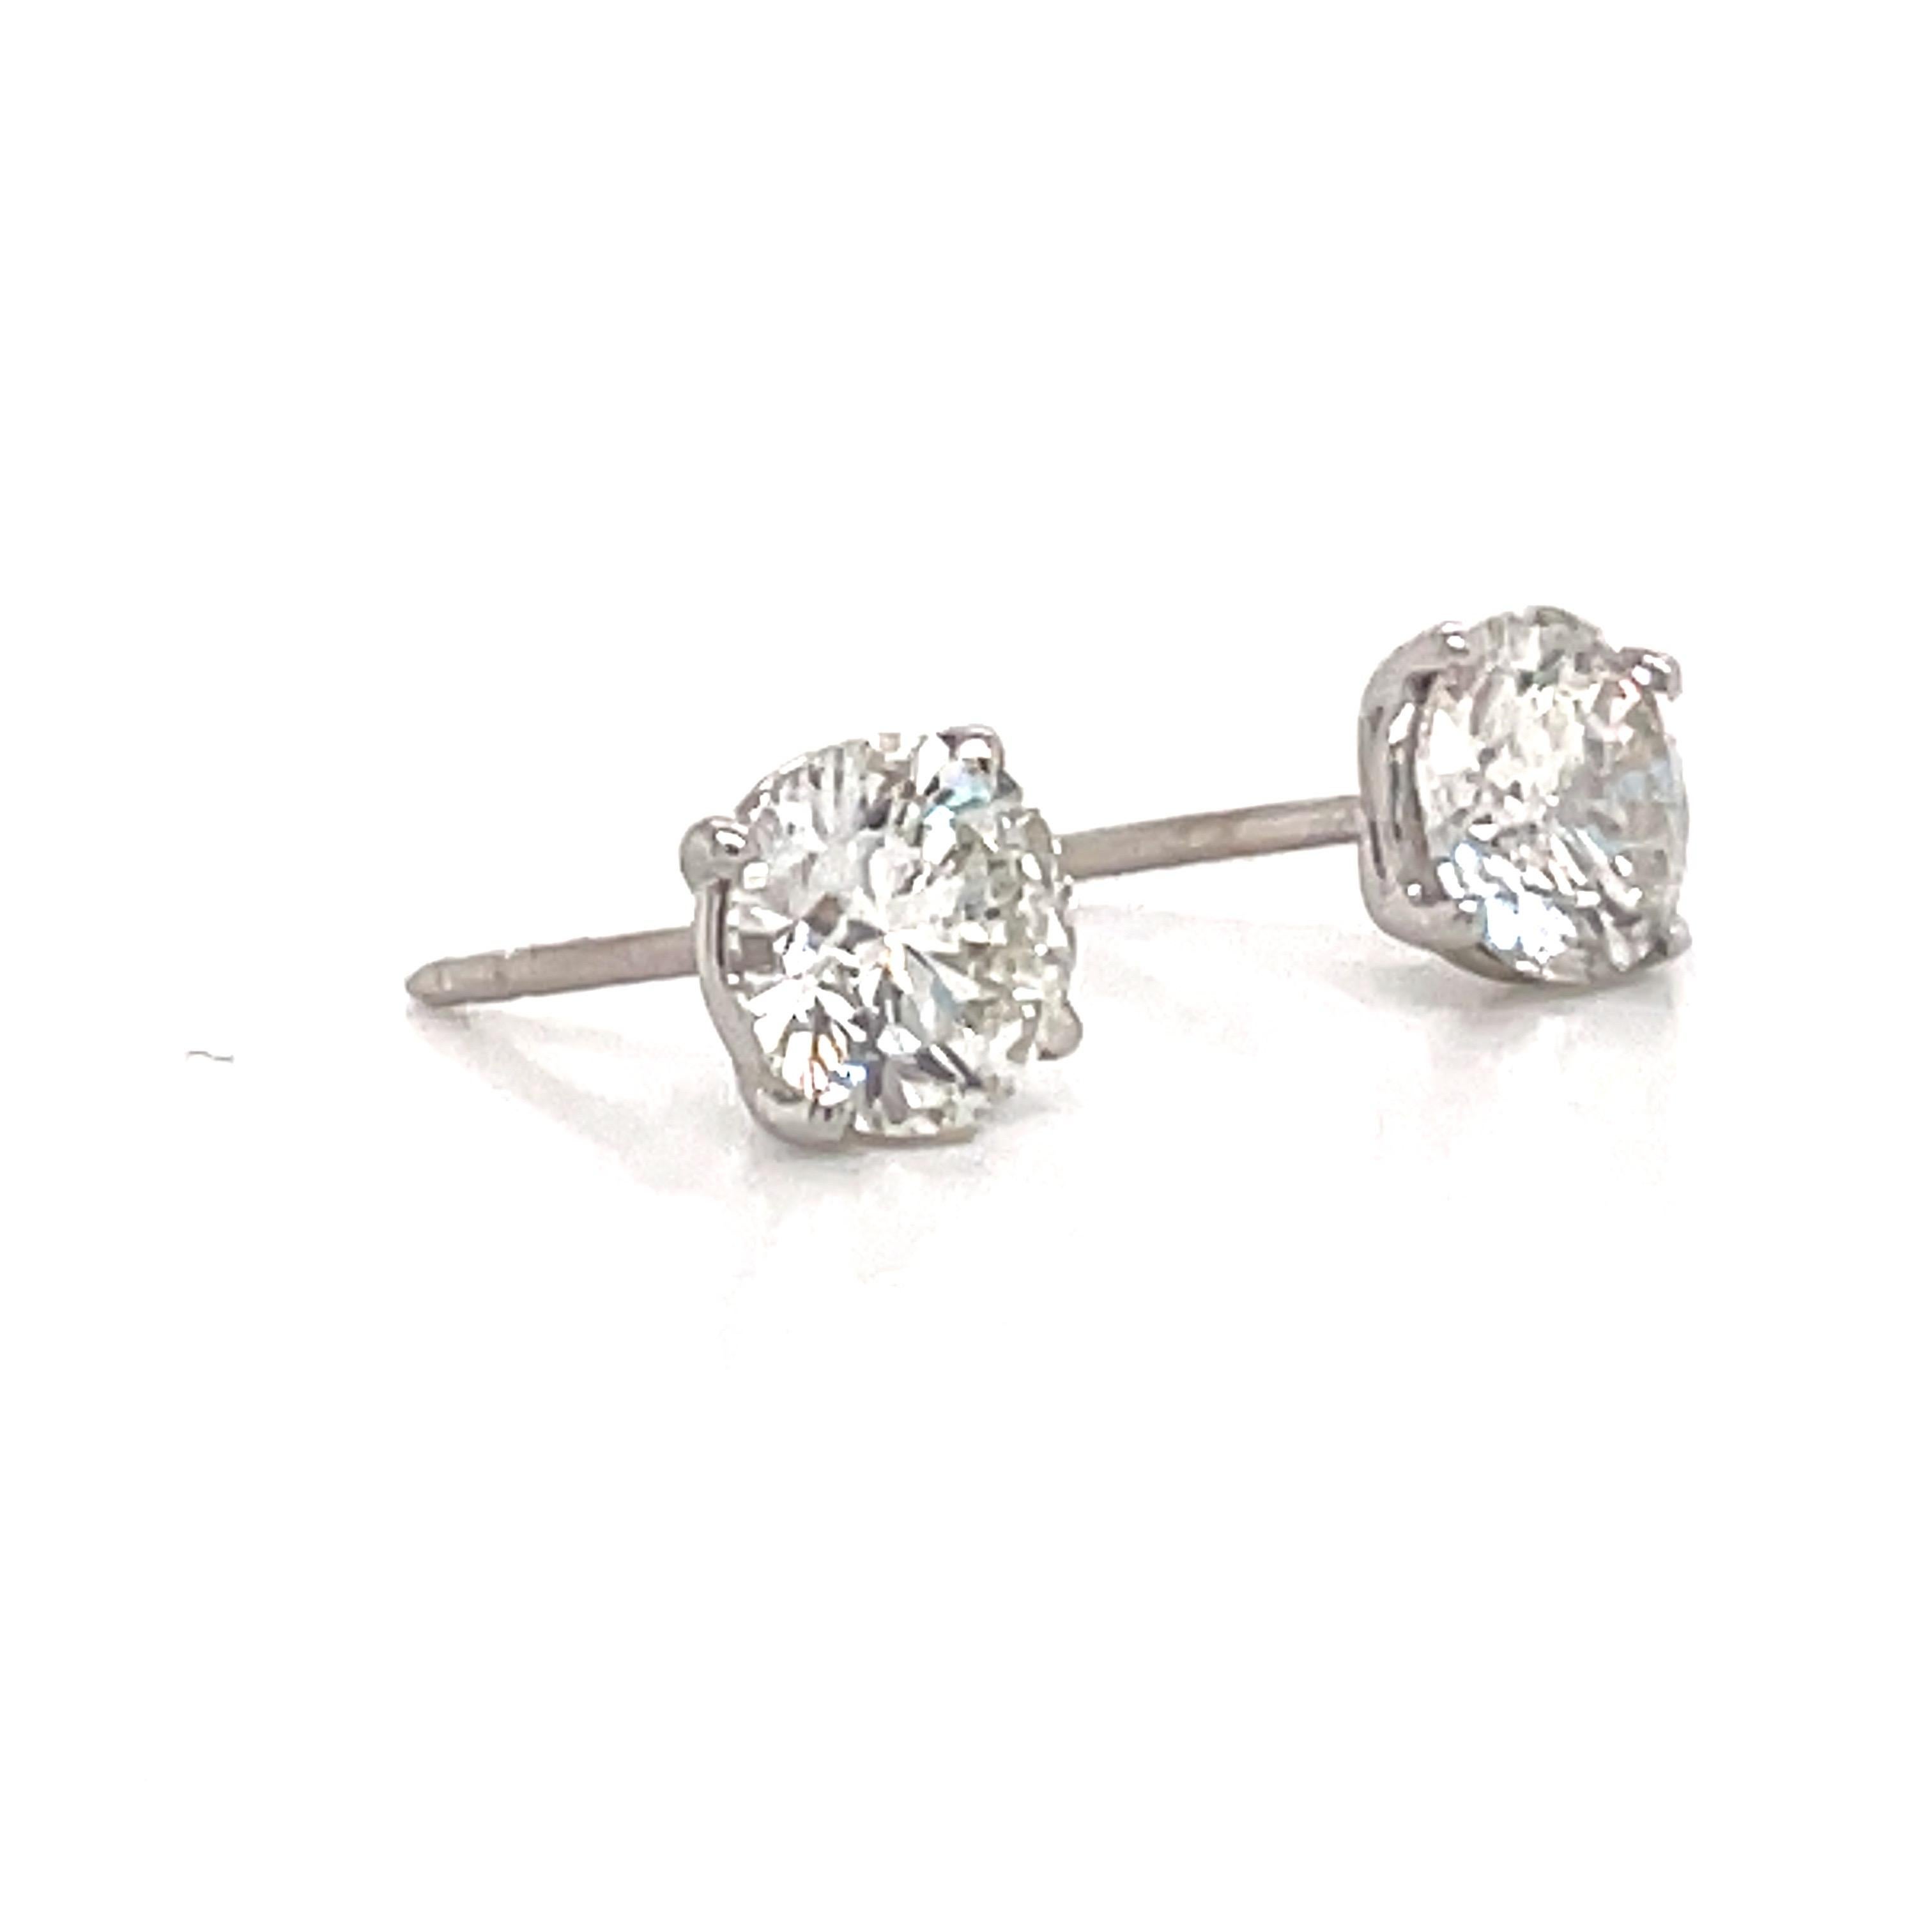 Diamond stud earrings weighing 2.29 carats in a 4 prong champagne setting, 18k white gold. 
Color H
Clarity I1